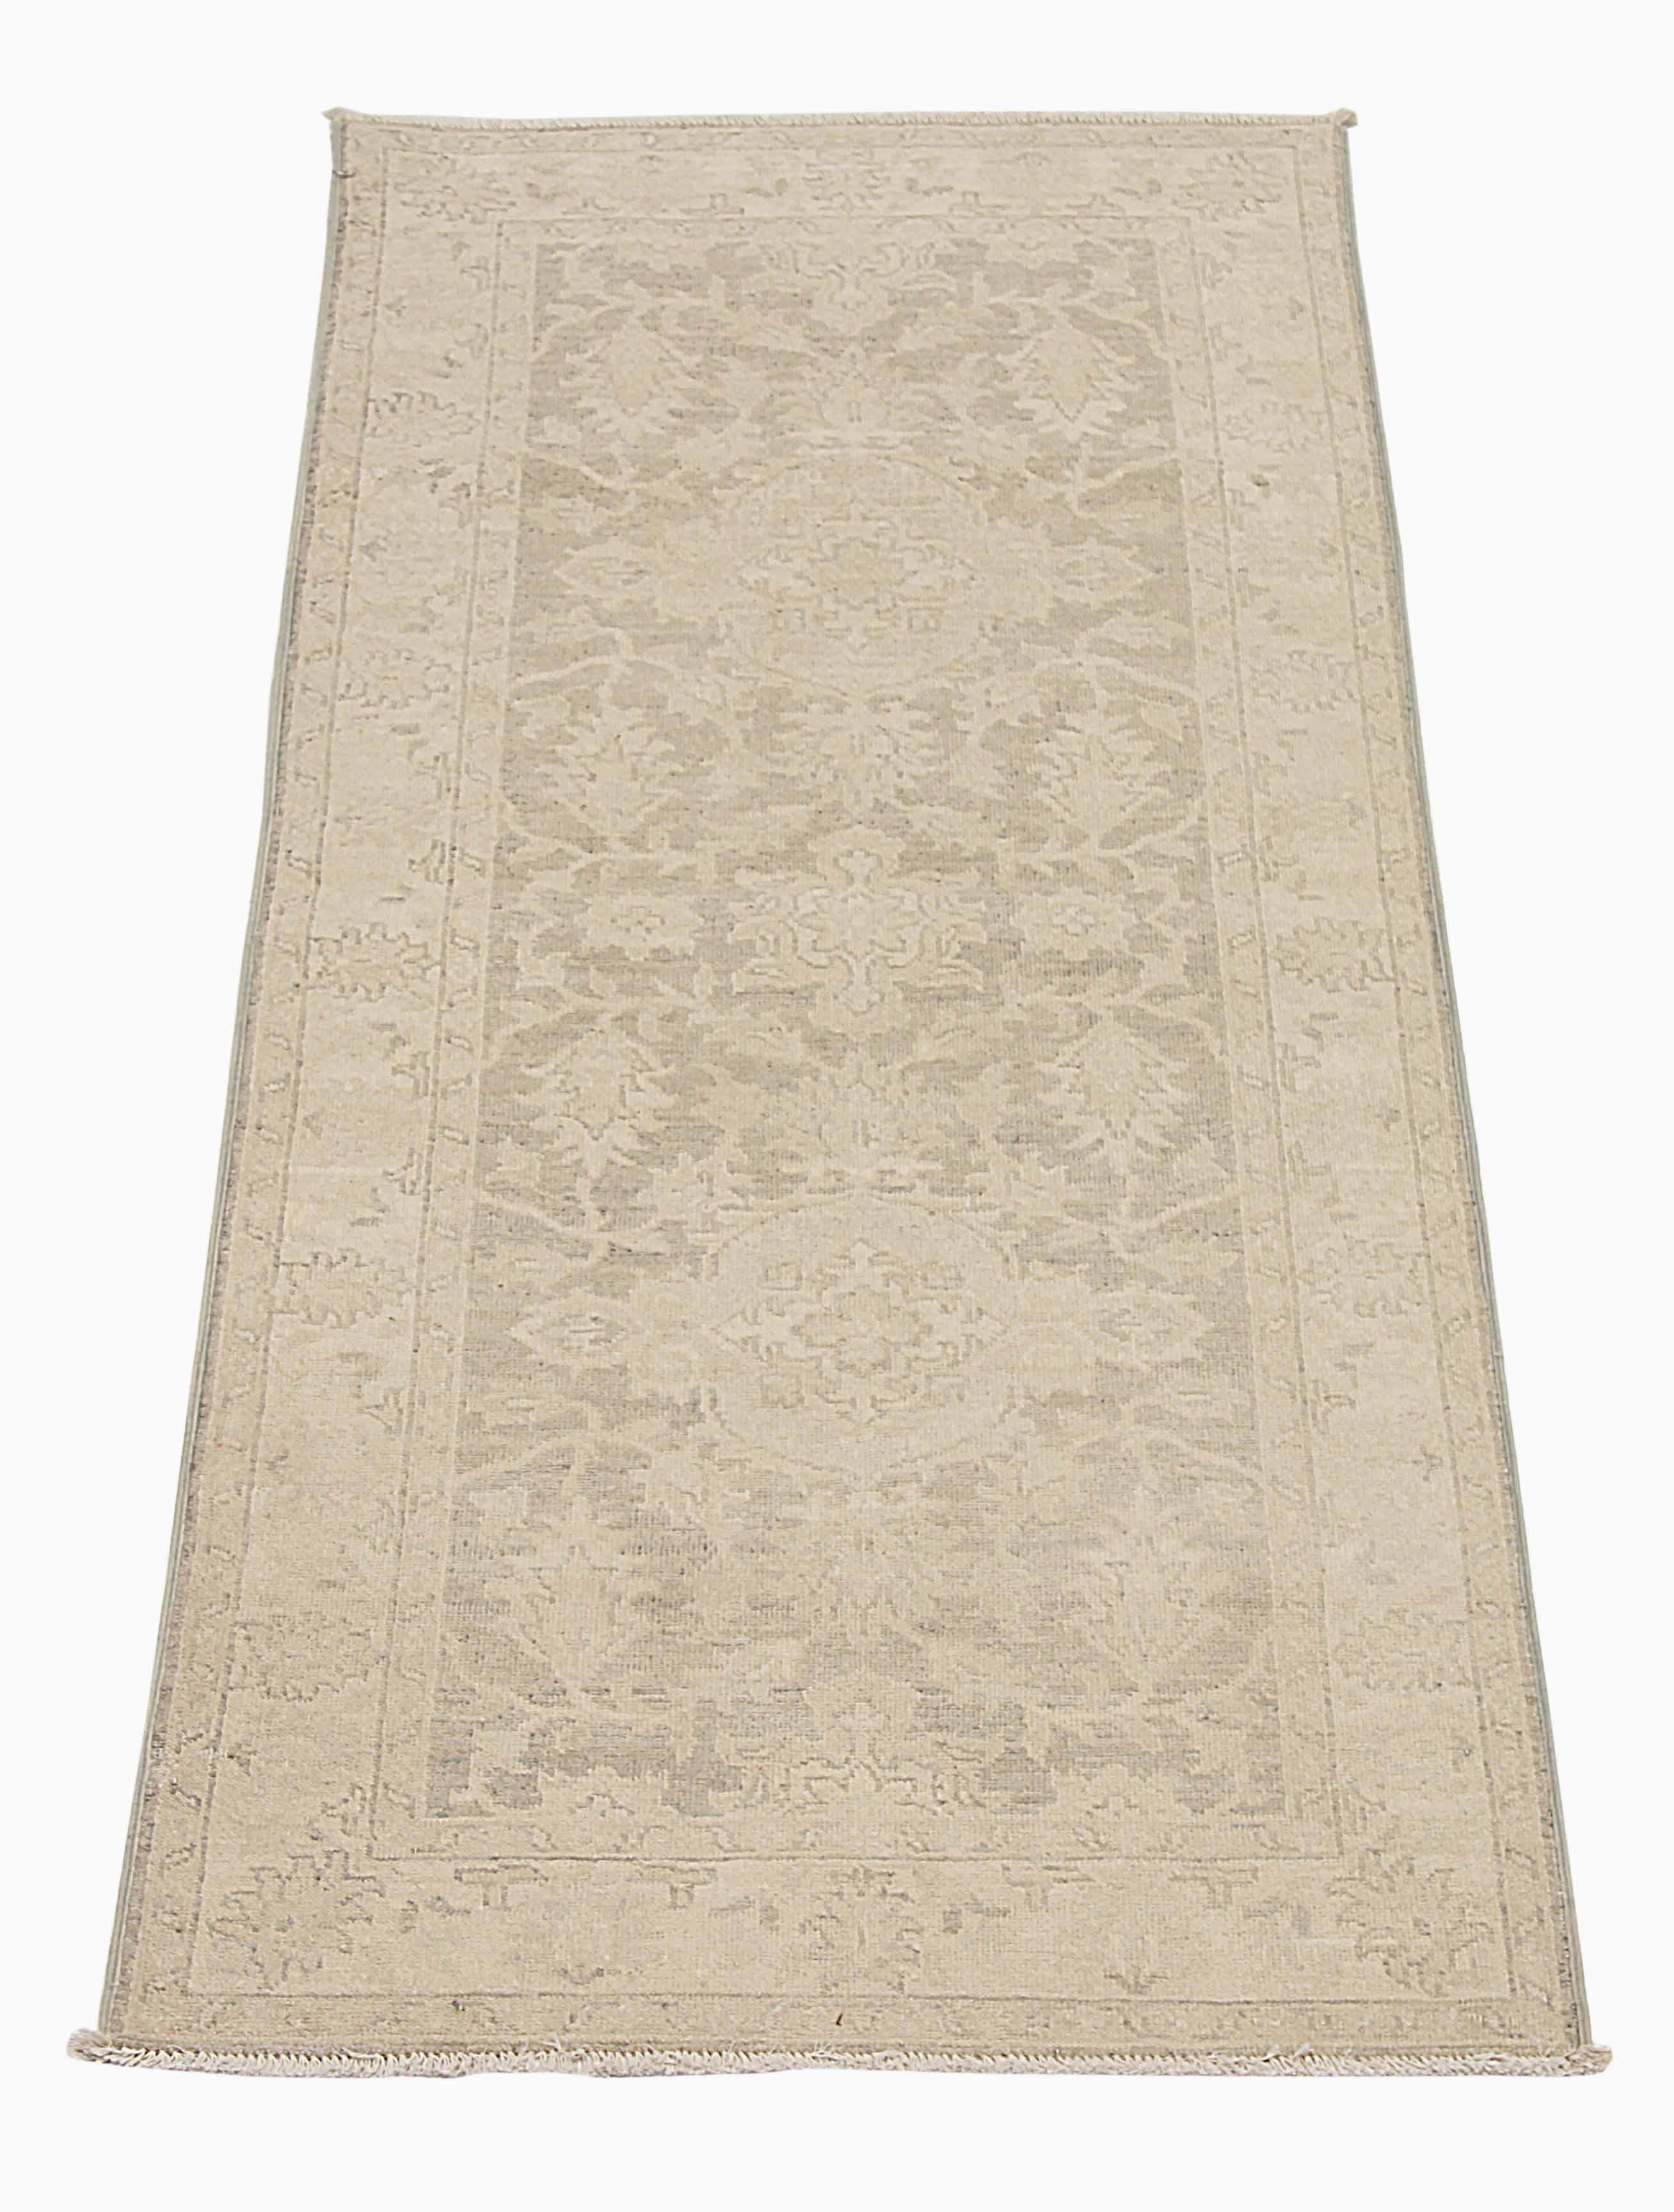 Transform your living space with this stunning, handwoven area rug. Made from the finest sheep's wool and colored with eco-friendly, all-natural vegetable dyes, this rug is a beautiful and responsible addition to your home.

Boasting the classic